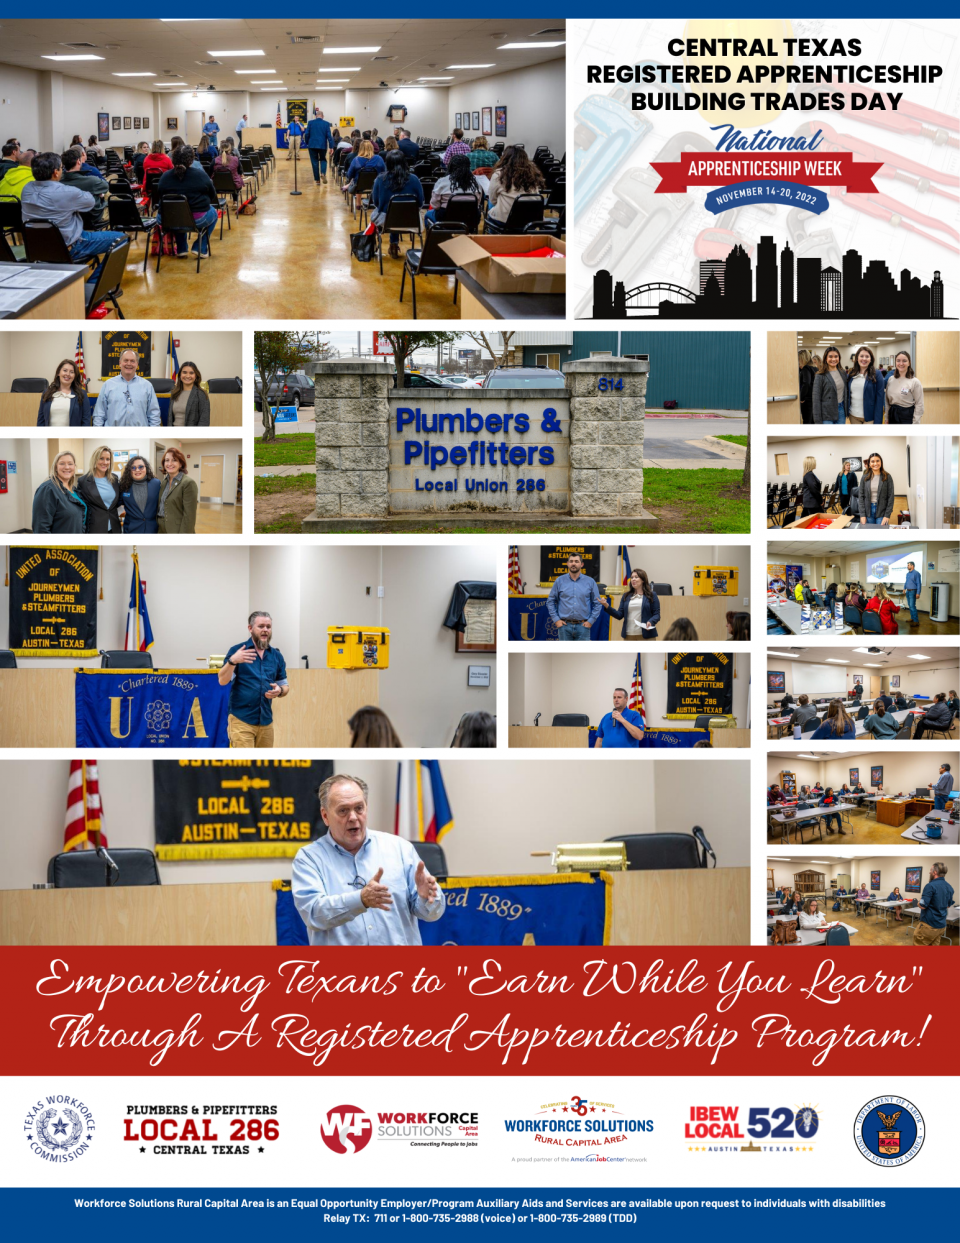 WSRCA Joins with Partners to Host Registered Apprenticeship Building Trades Day